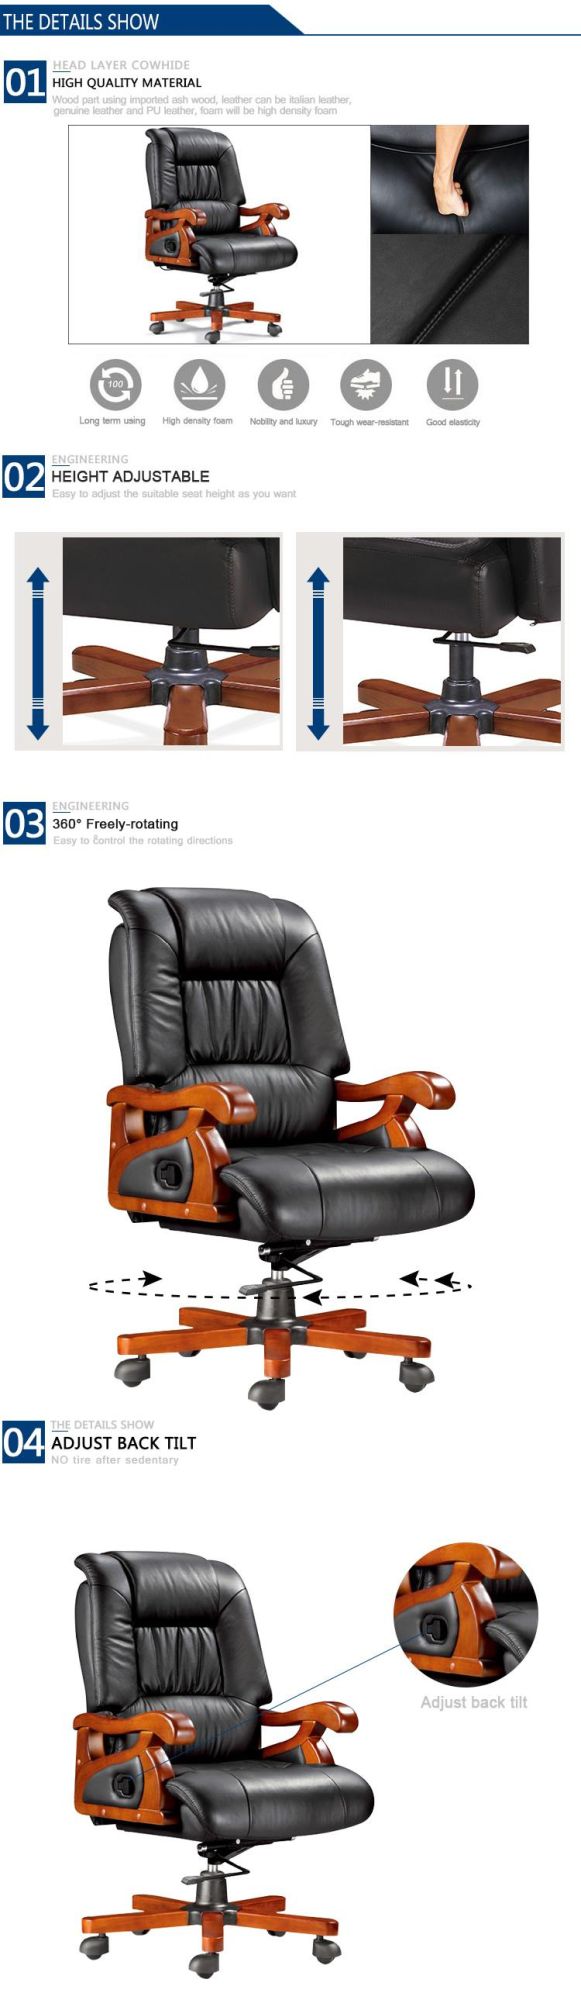 No Folded and Office Chair Specific Use Genuine Leather Office Chair